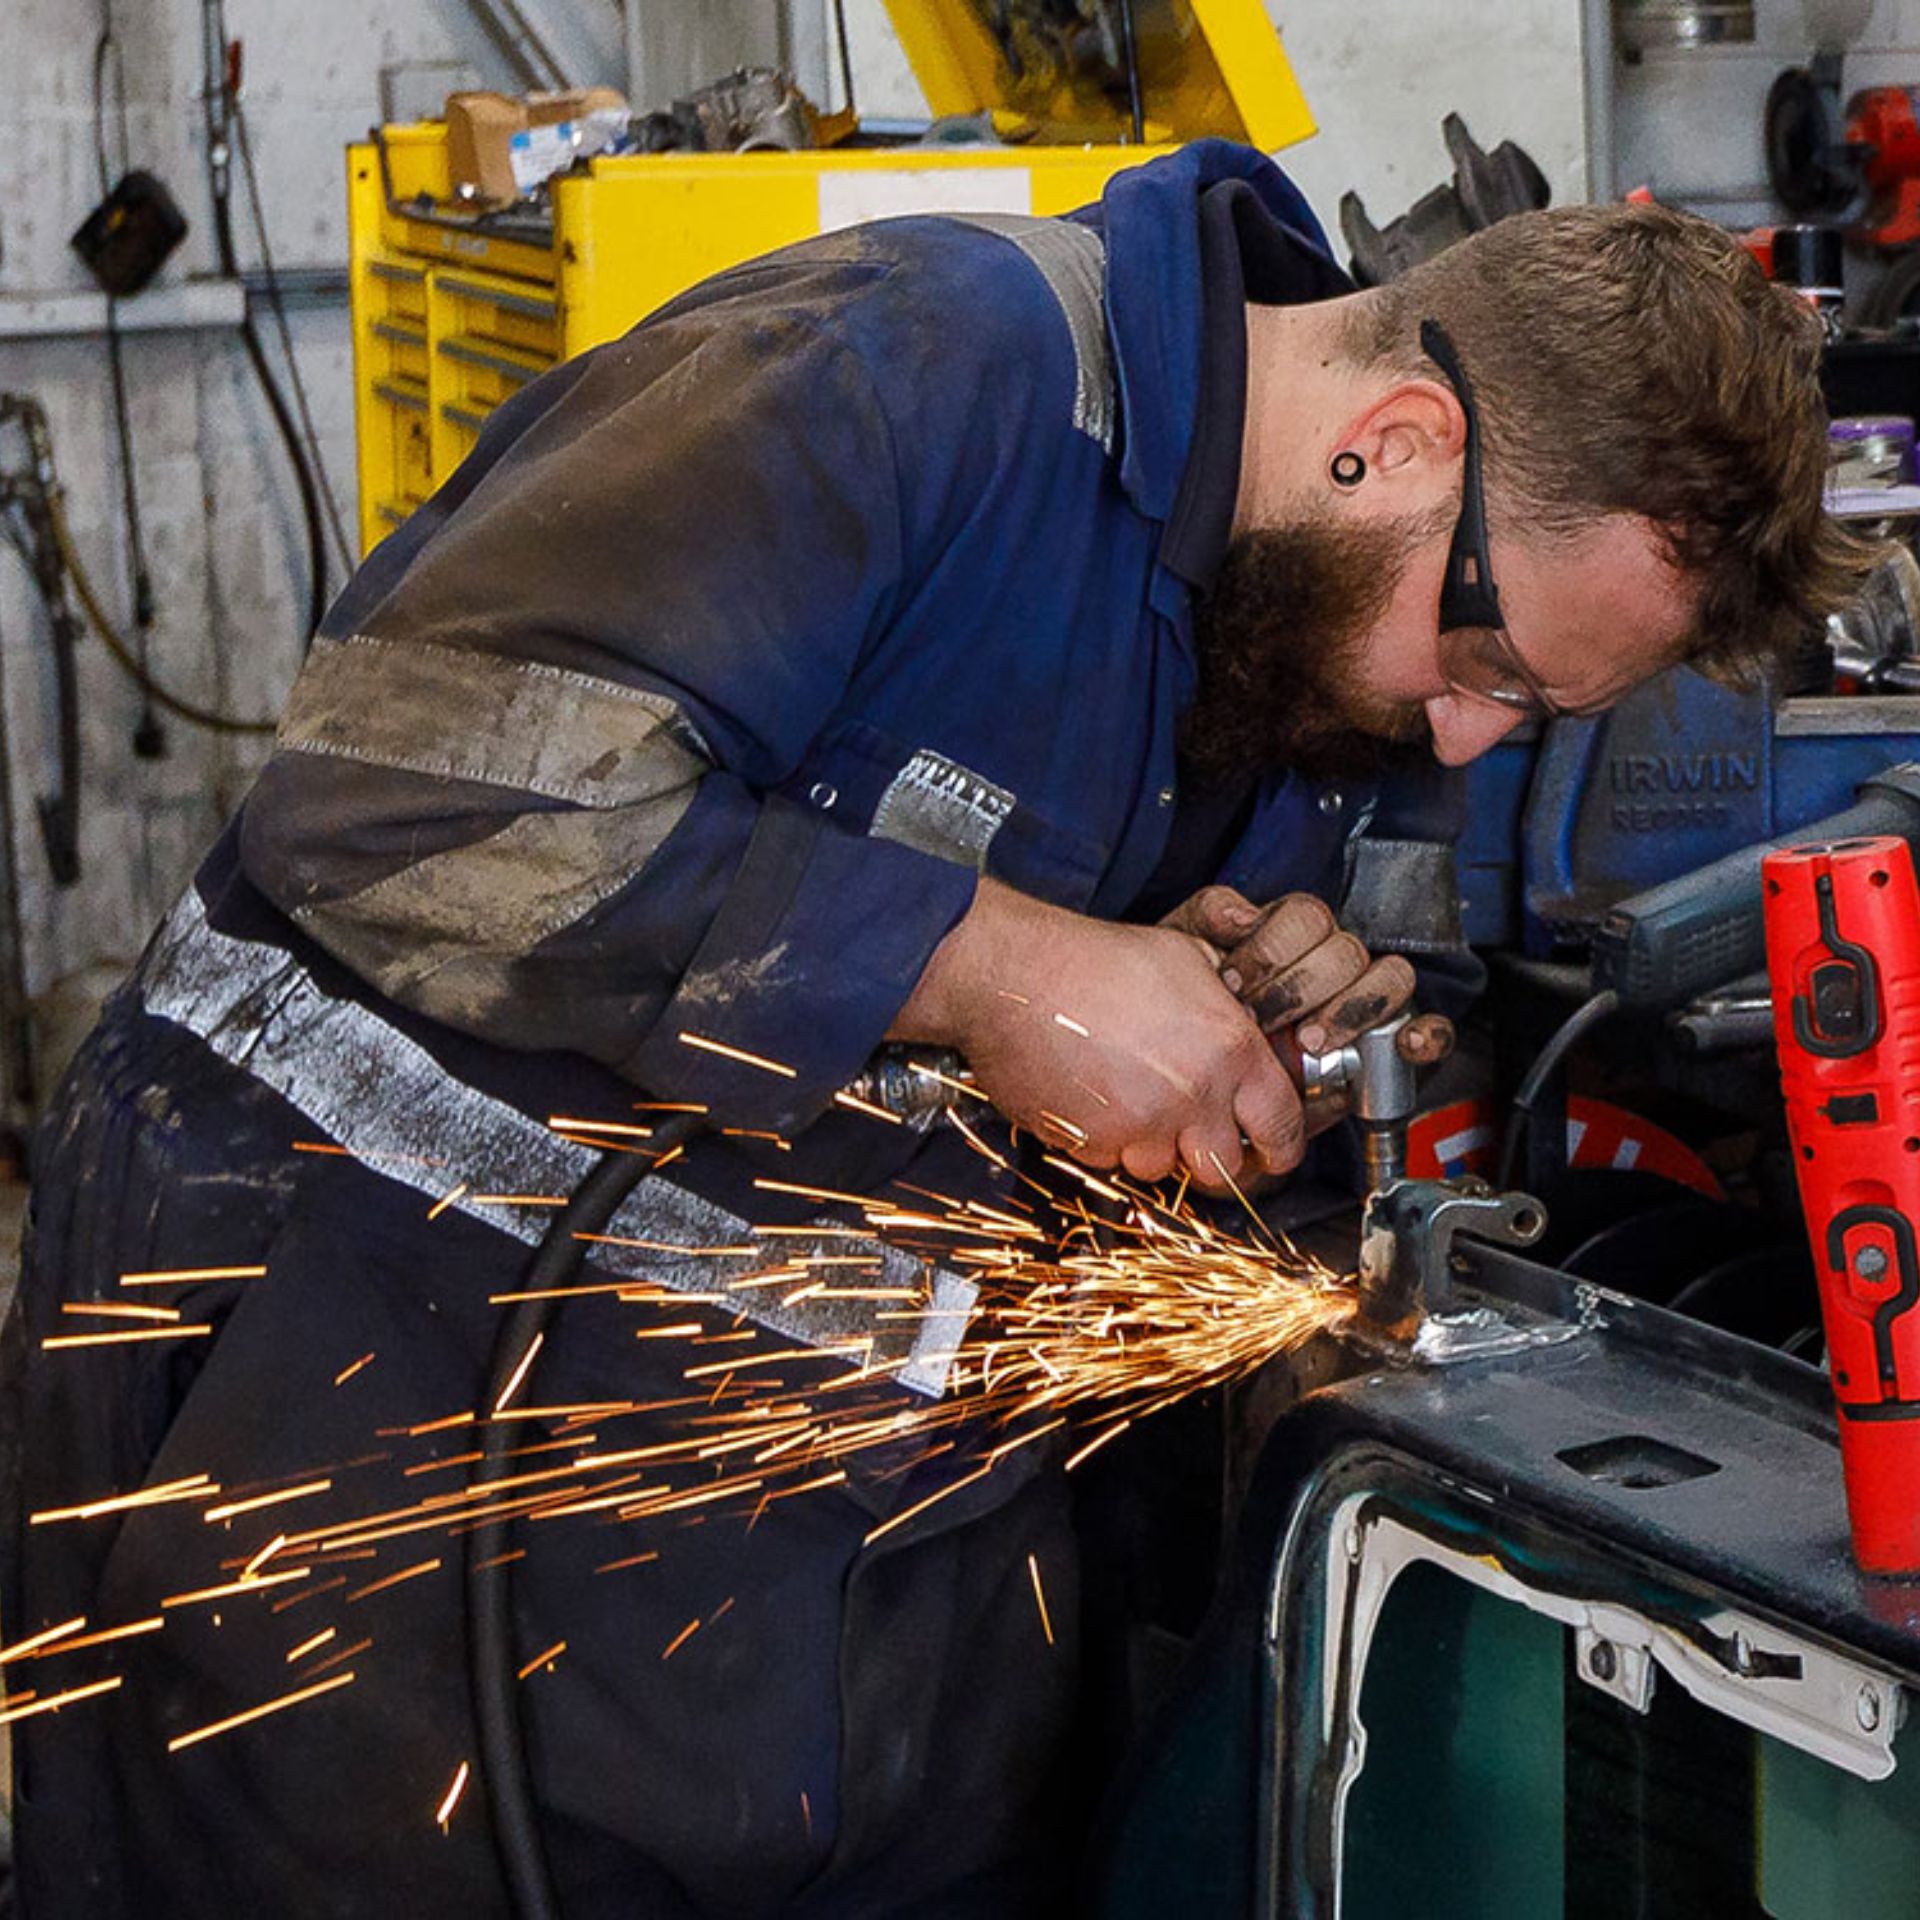 A mechanic using an angle grinder in a workshop